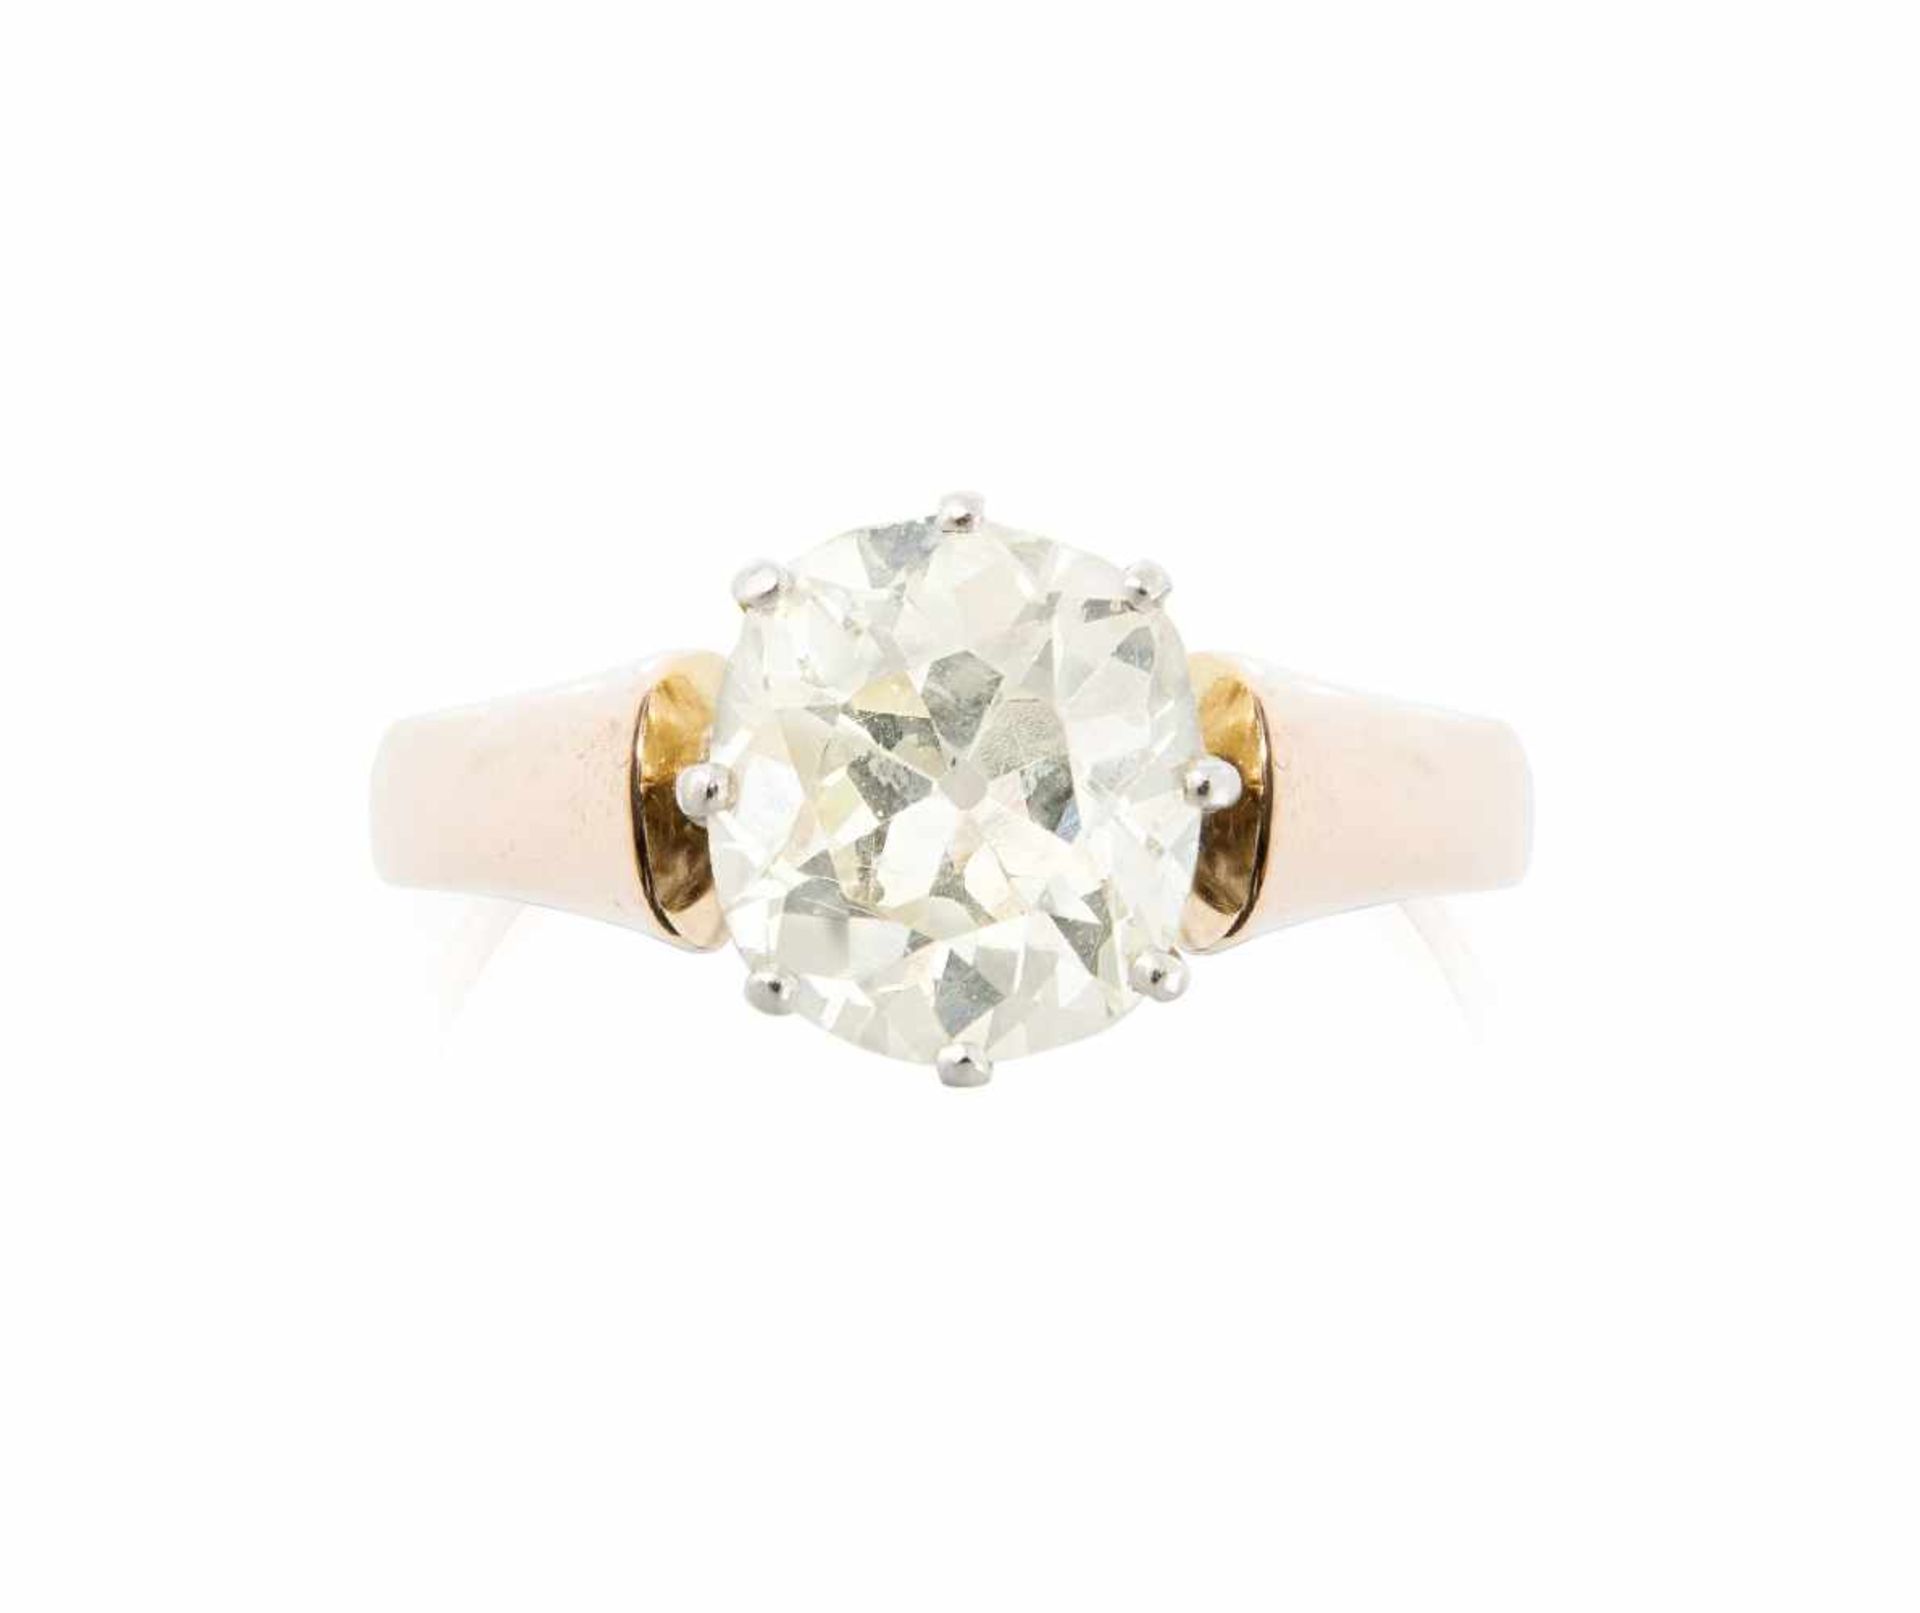 Diamant-Ring Anfang 20.Jh. 750 Rotgold. 950 Platin. 1 Altschliff-Diamant von ca. 2.20 ct, N/O-si.